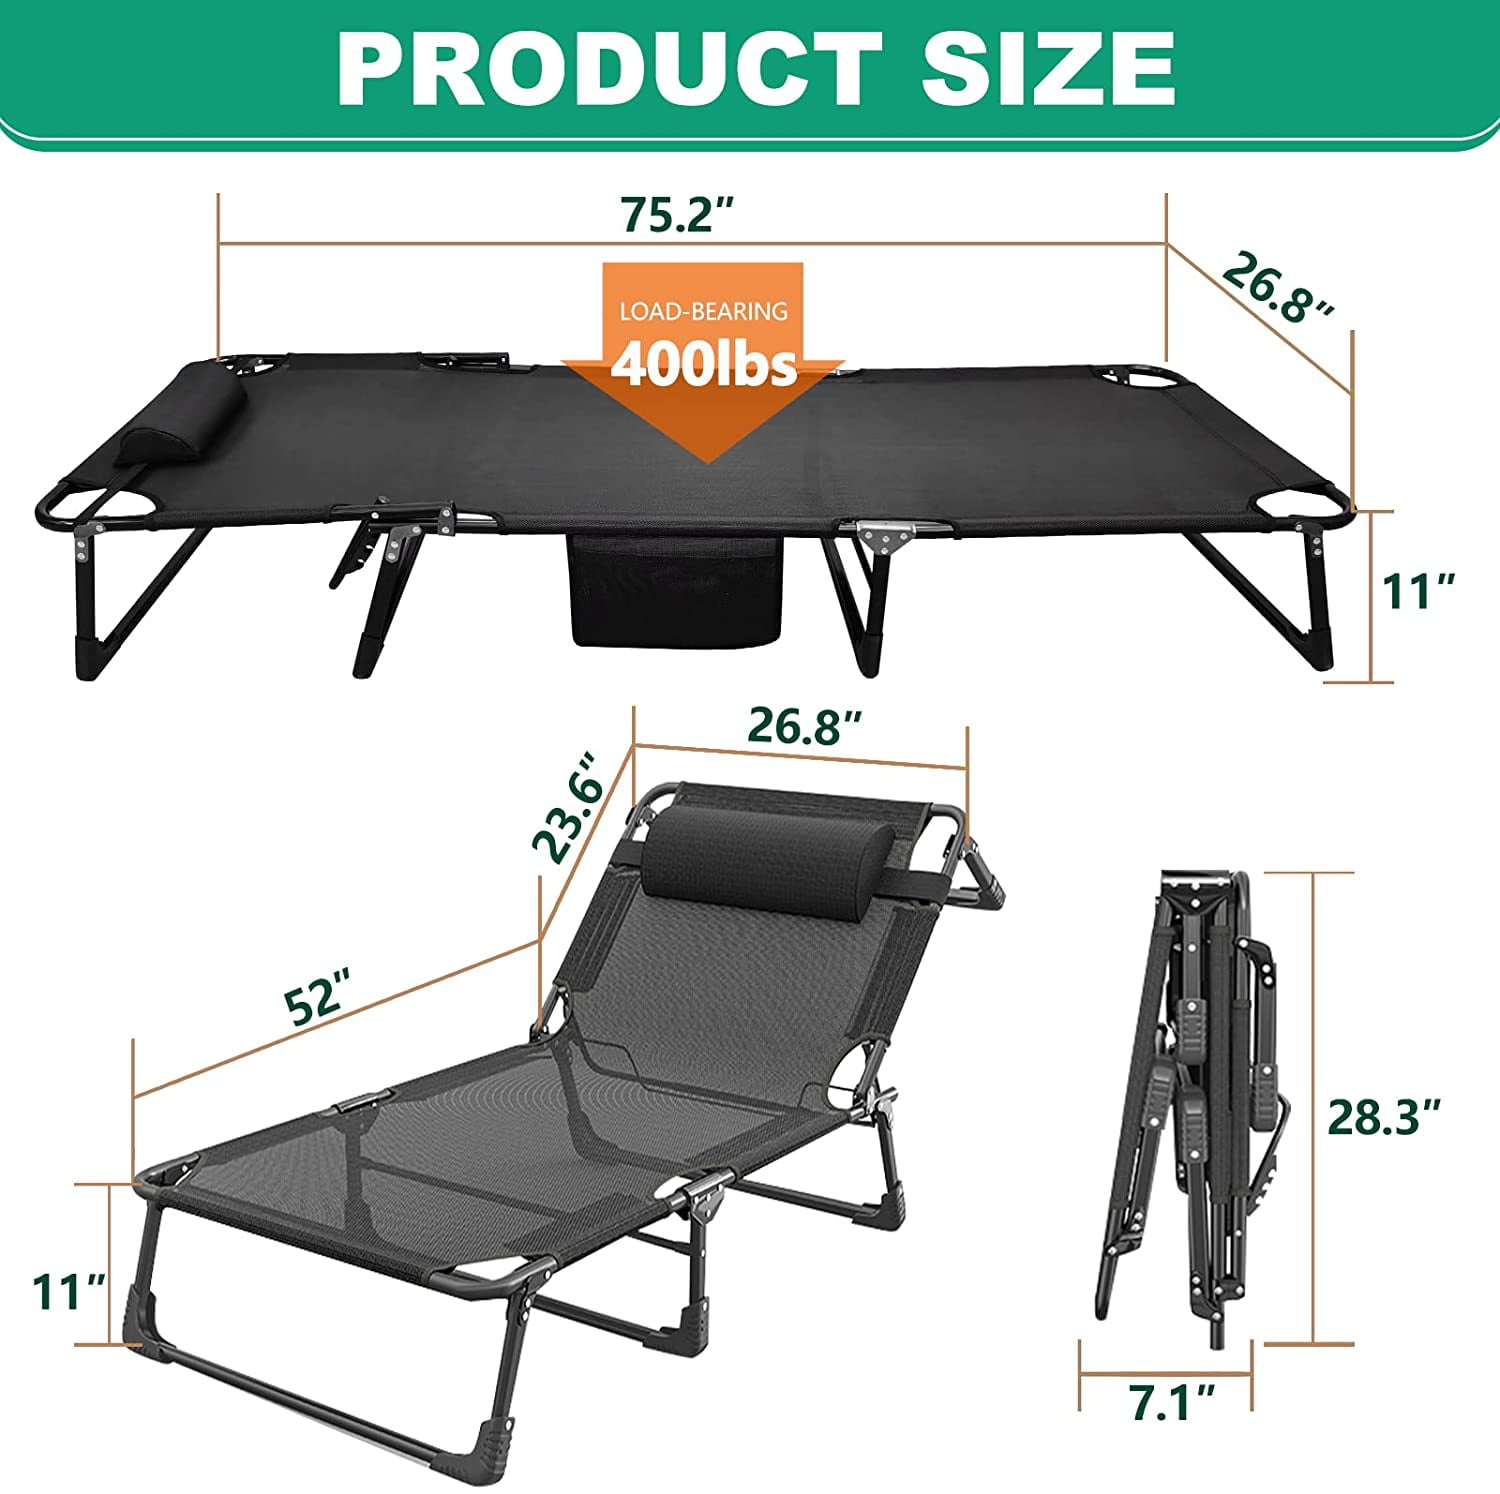 Slsy 4-Fold Sleeping Cots for Adults,Portable Folding Camping Cot,Outside Adults Reclining Folding Chaise with Pillow,Outdoor Patio Lounge Chair for Suntanning,Perfect for Pool/Beach/Patio/Sunbathing 